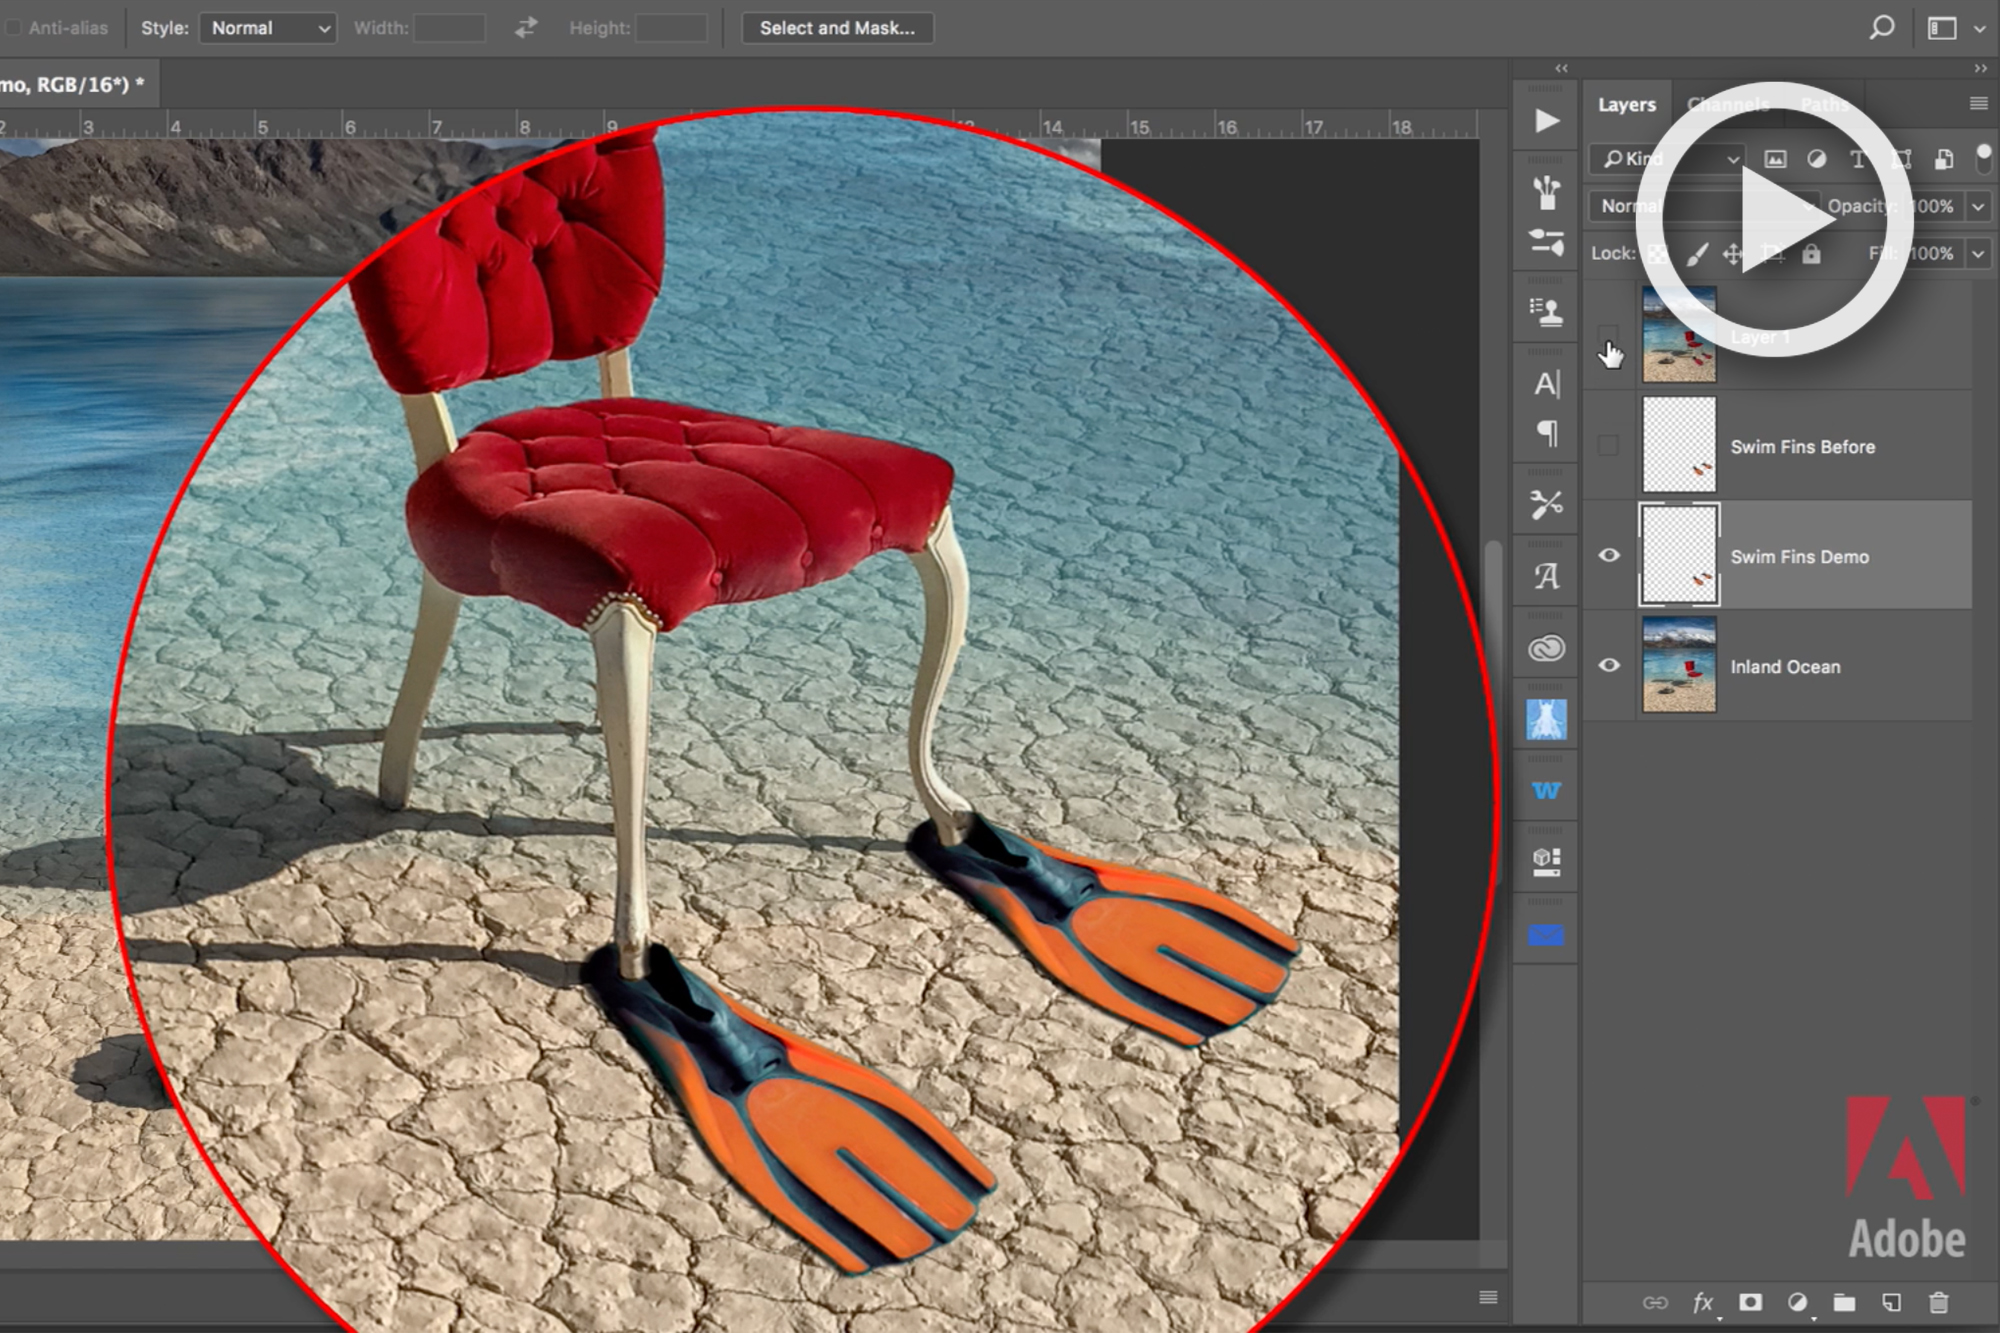 Make Color Adjustments & Match Color With This Clever Trick Using Black & White Tools